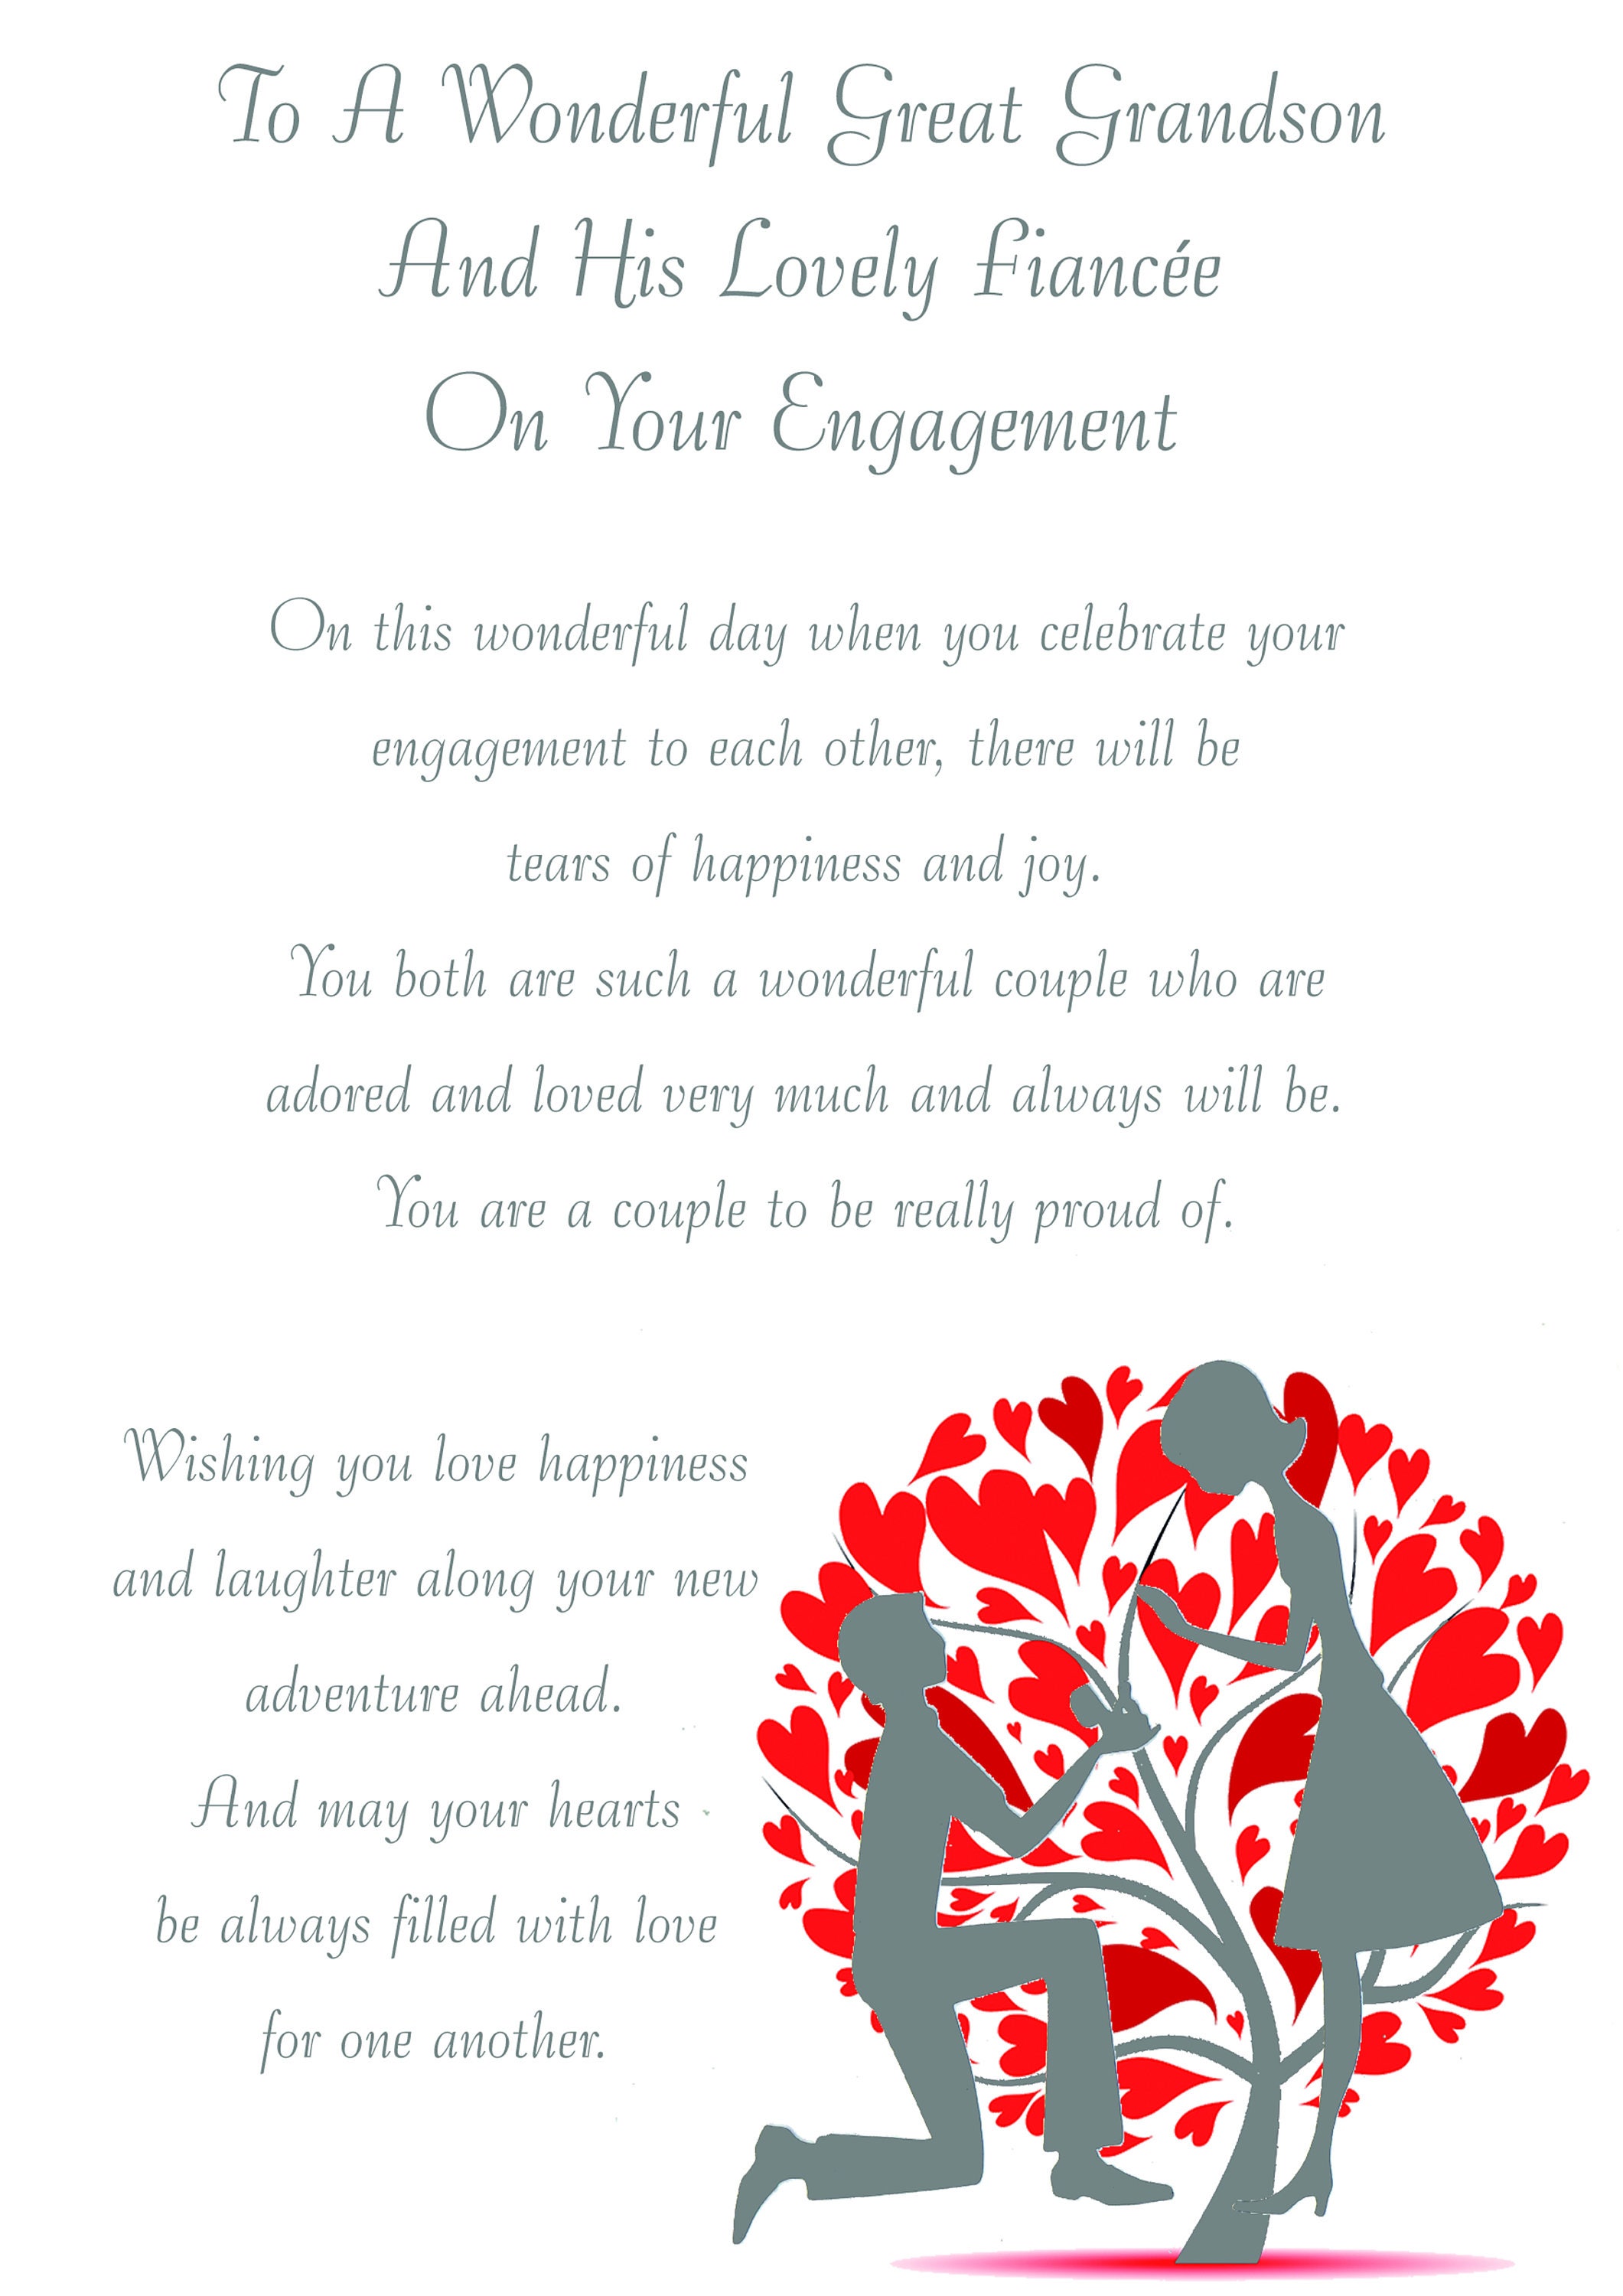 Great Grandson & Fiancee Engagement Card